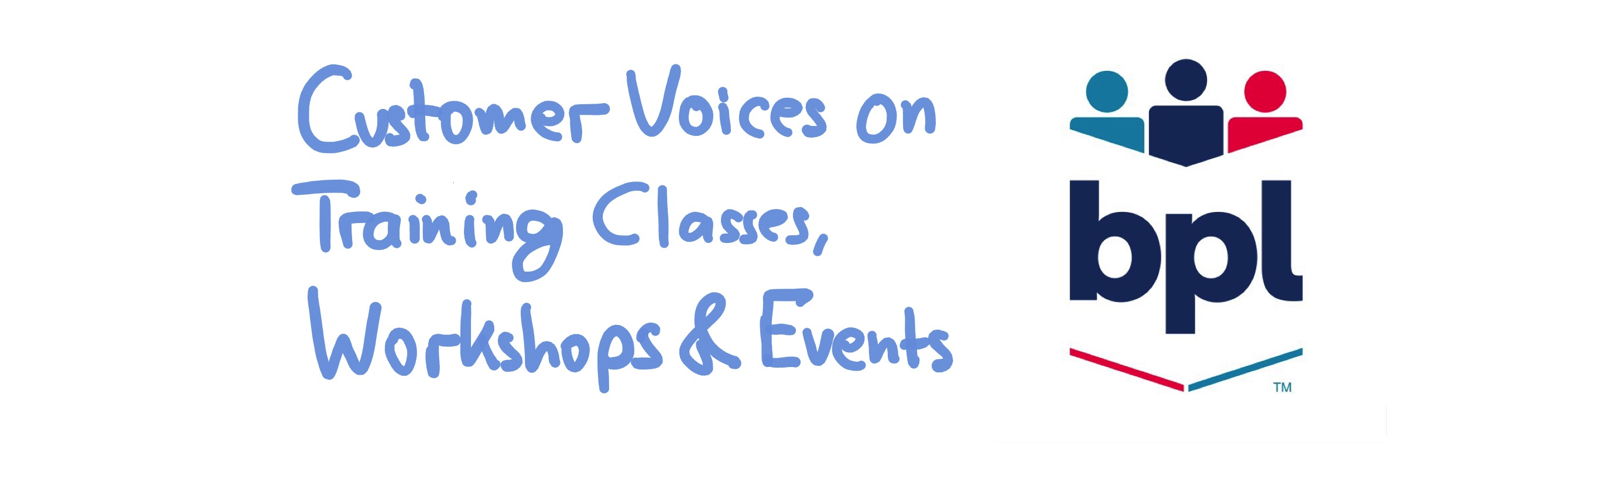 Customer Voices on Training Classes and Workshops by Berlin Product People GmbH